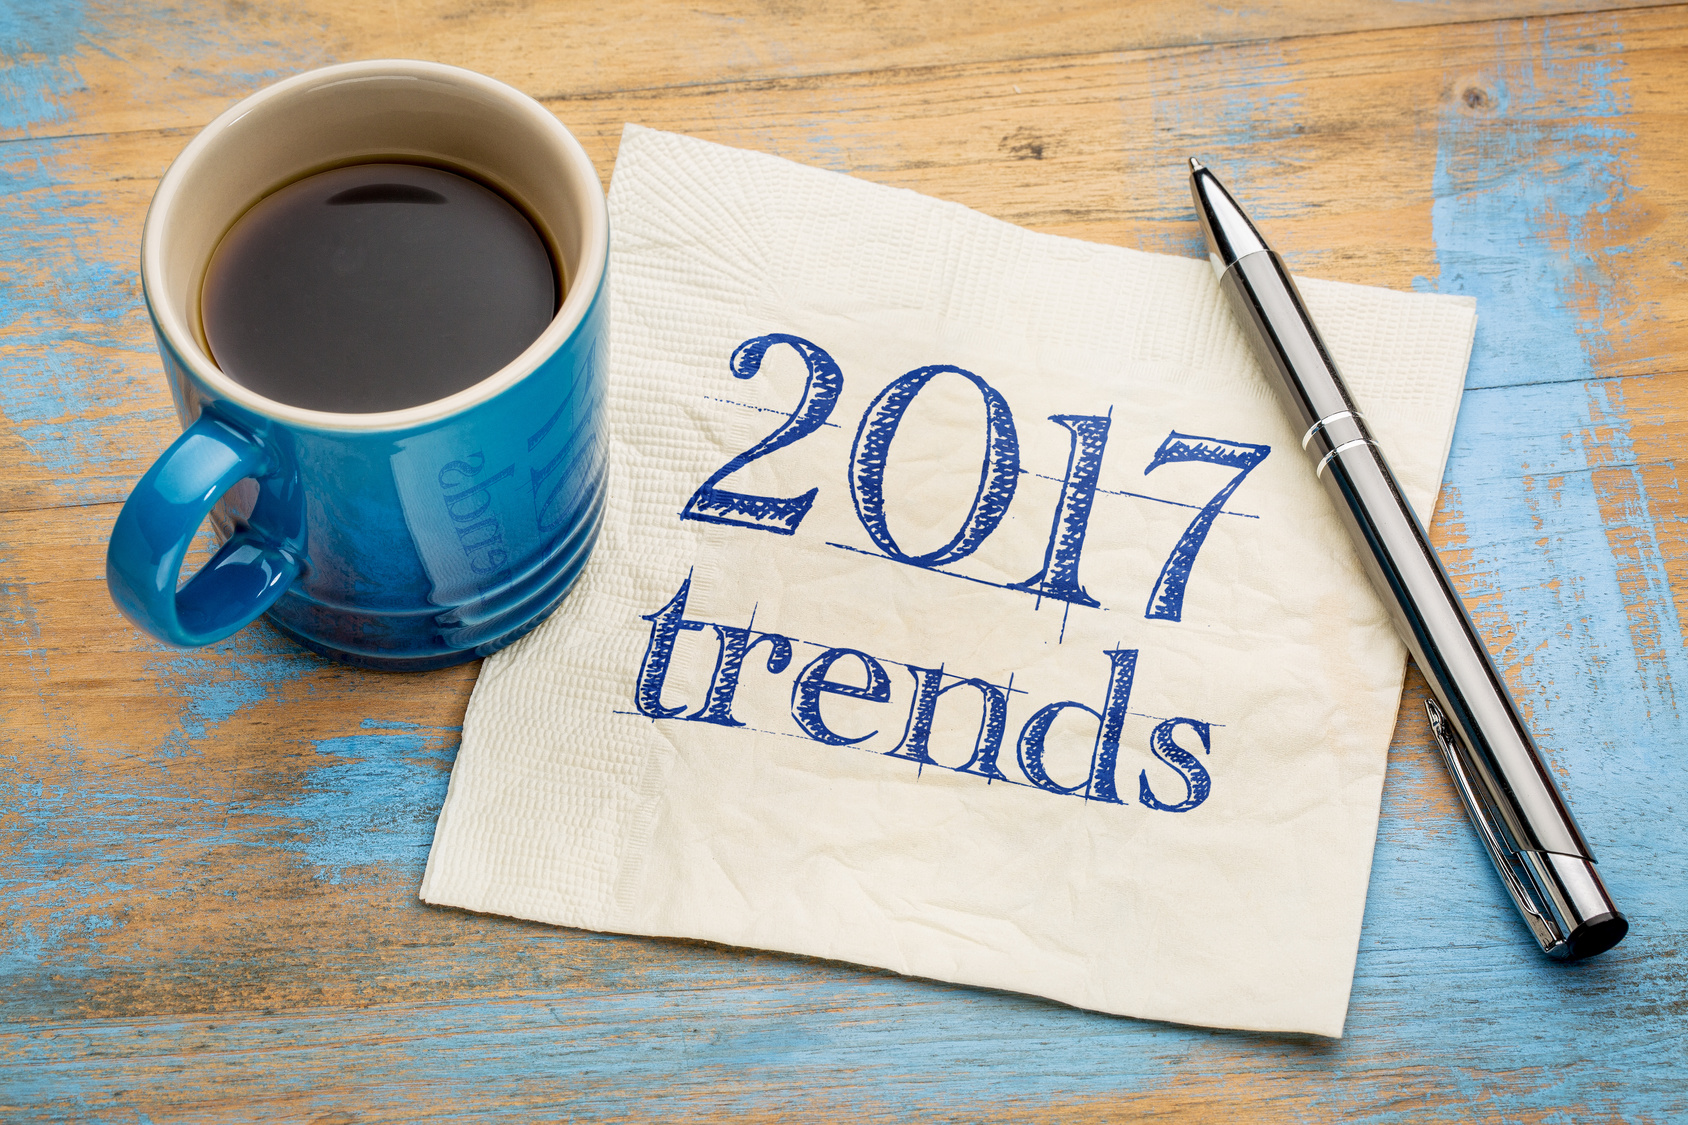 What SEO Trends to Expect in 2017?